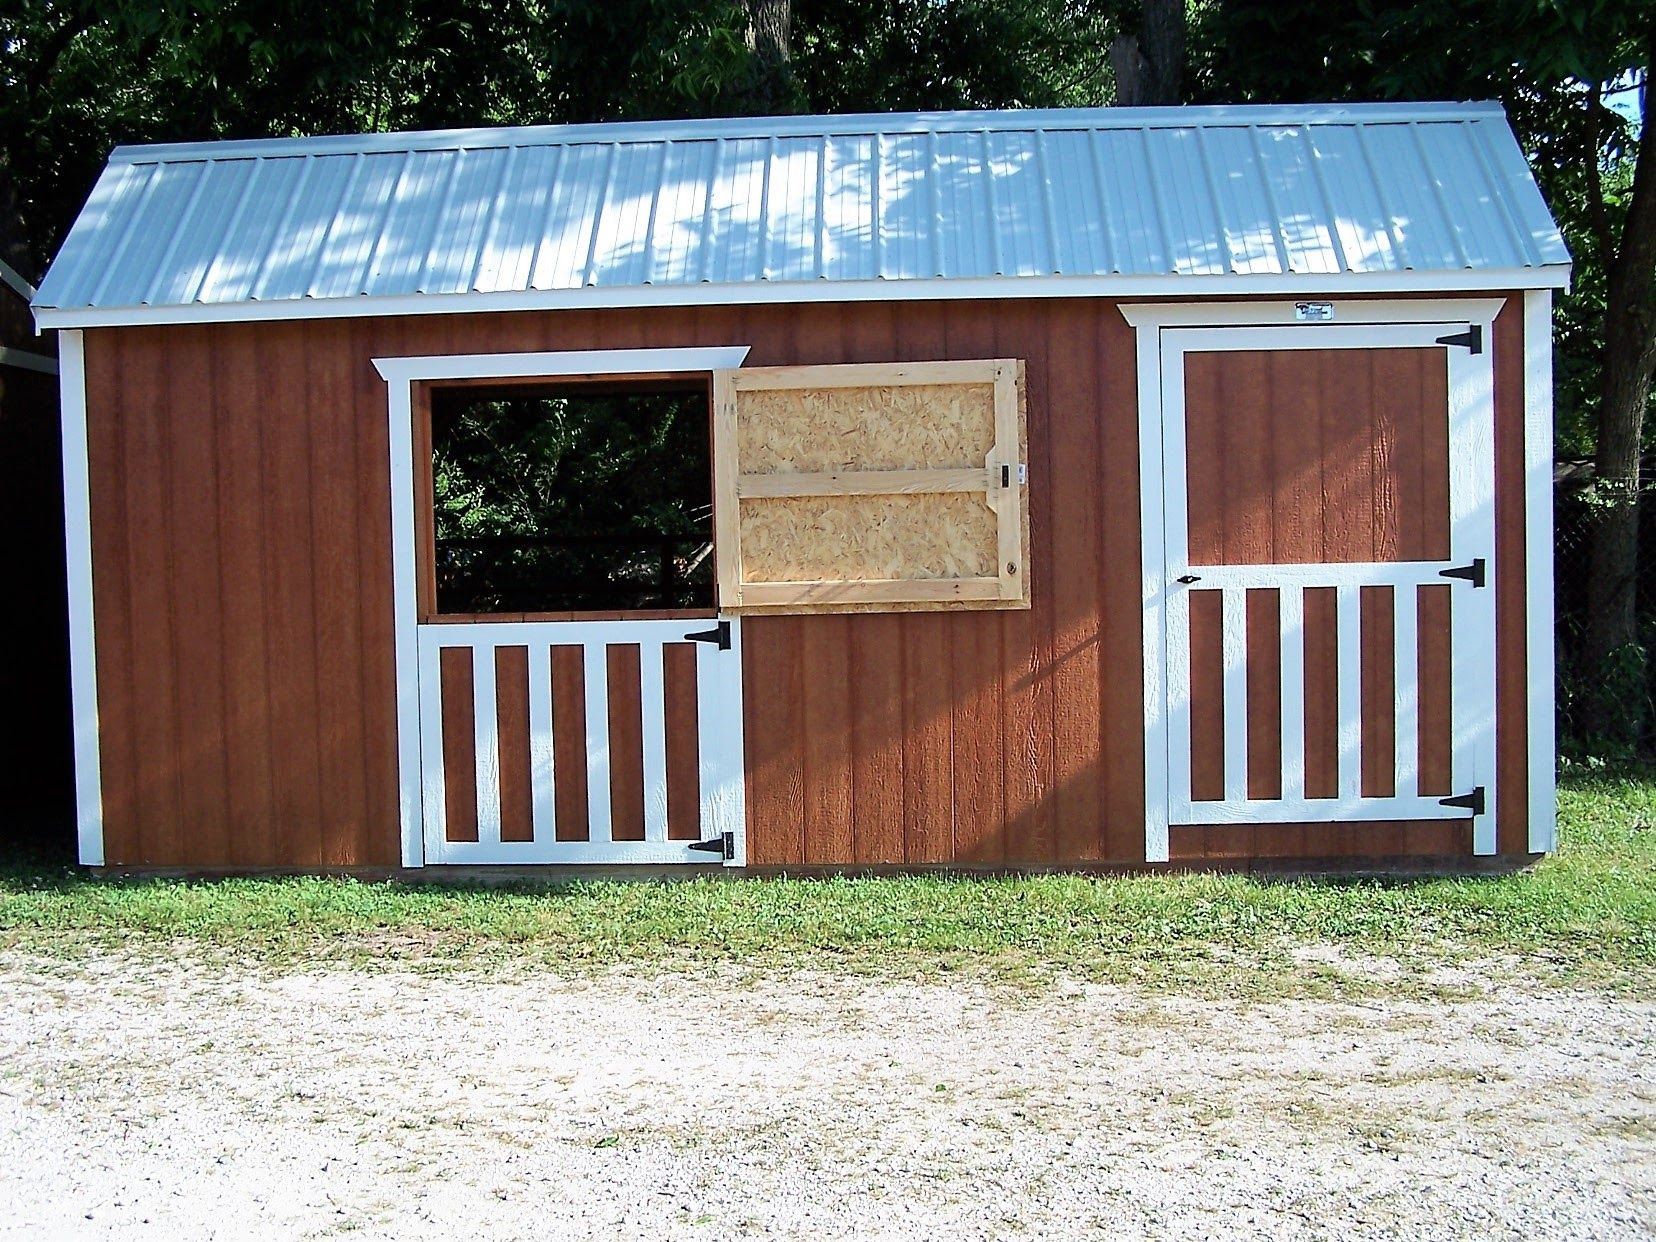 Thrifty Backyard Portable Buildings-Rent-2-Own
 Thrifty Backyard Portable Buildings Rent 2 Own